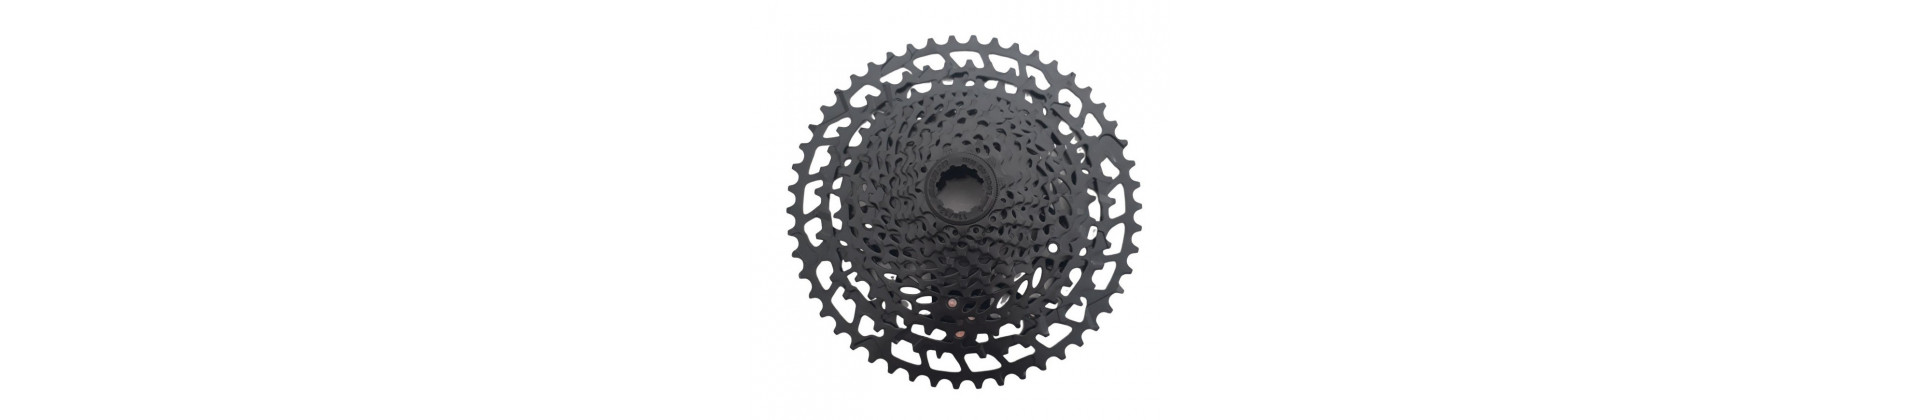 MTB chains and cassettes